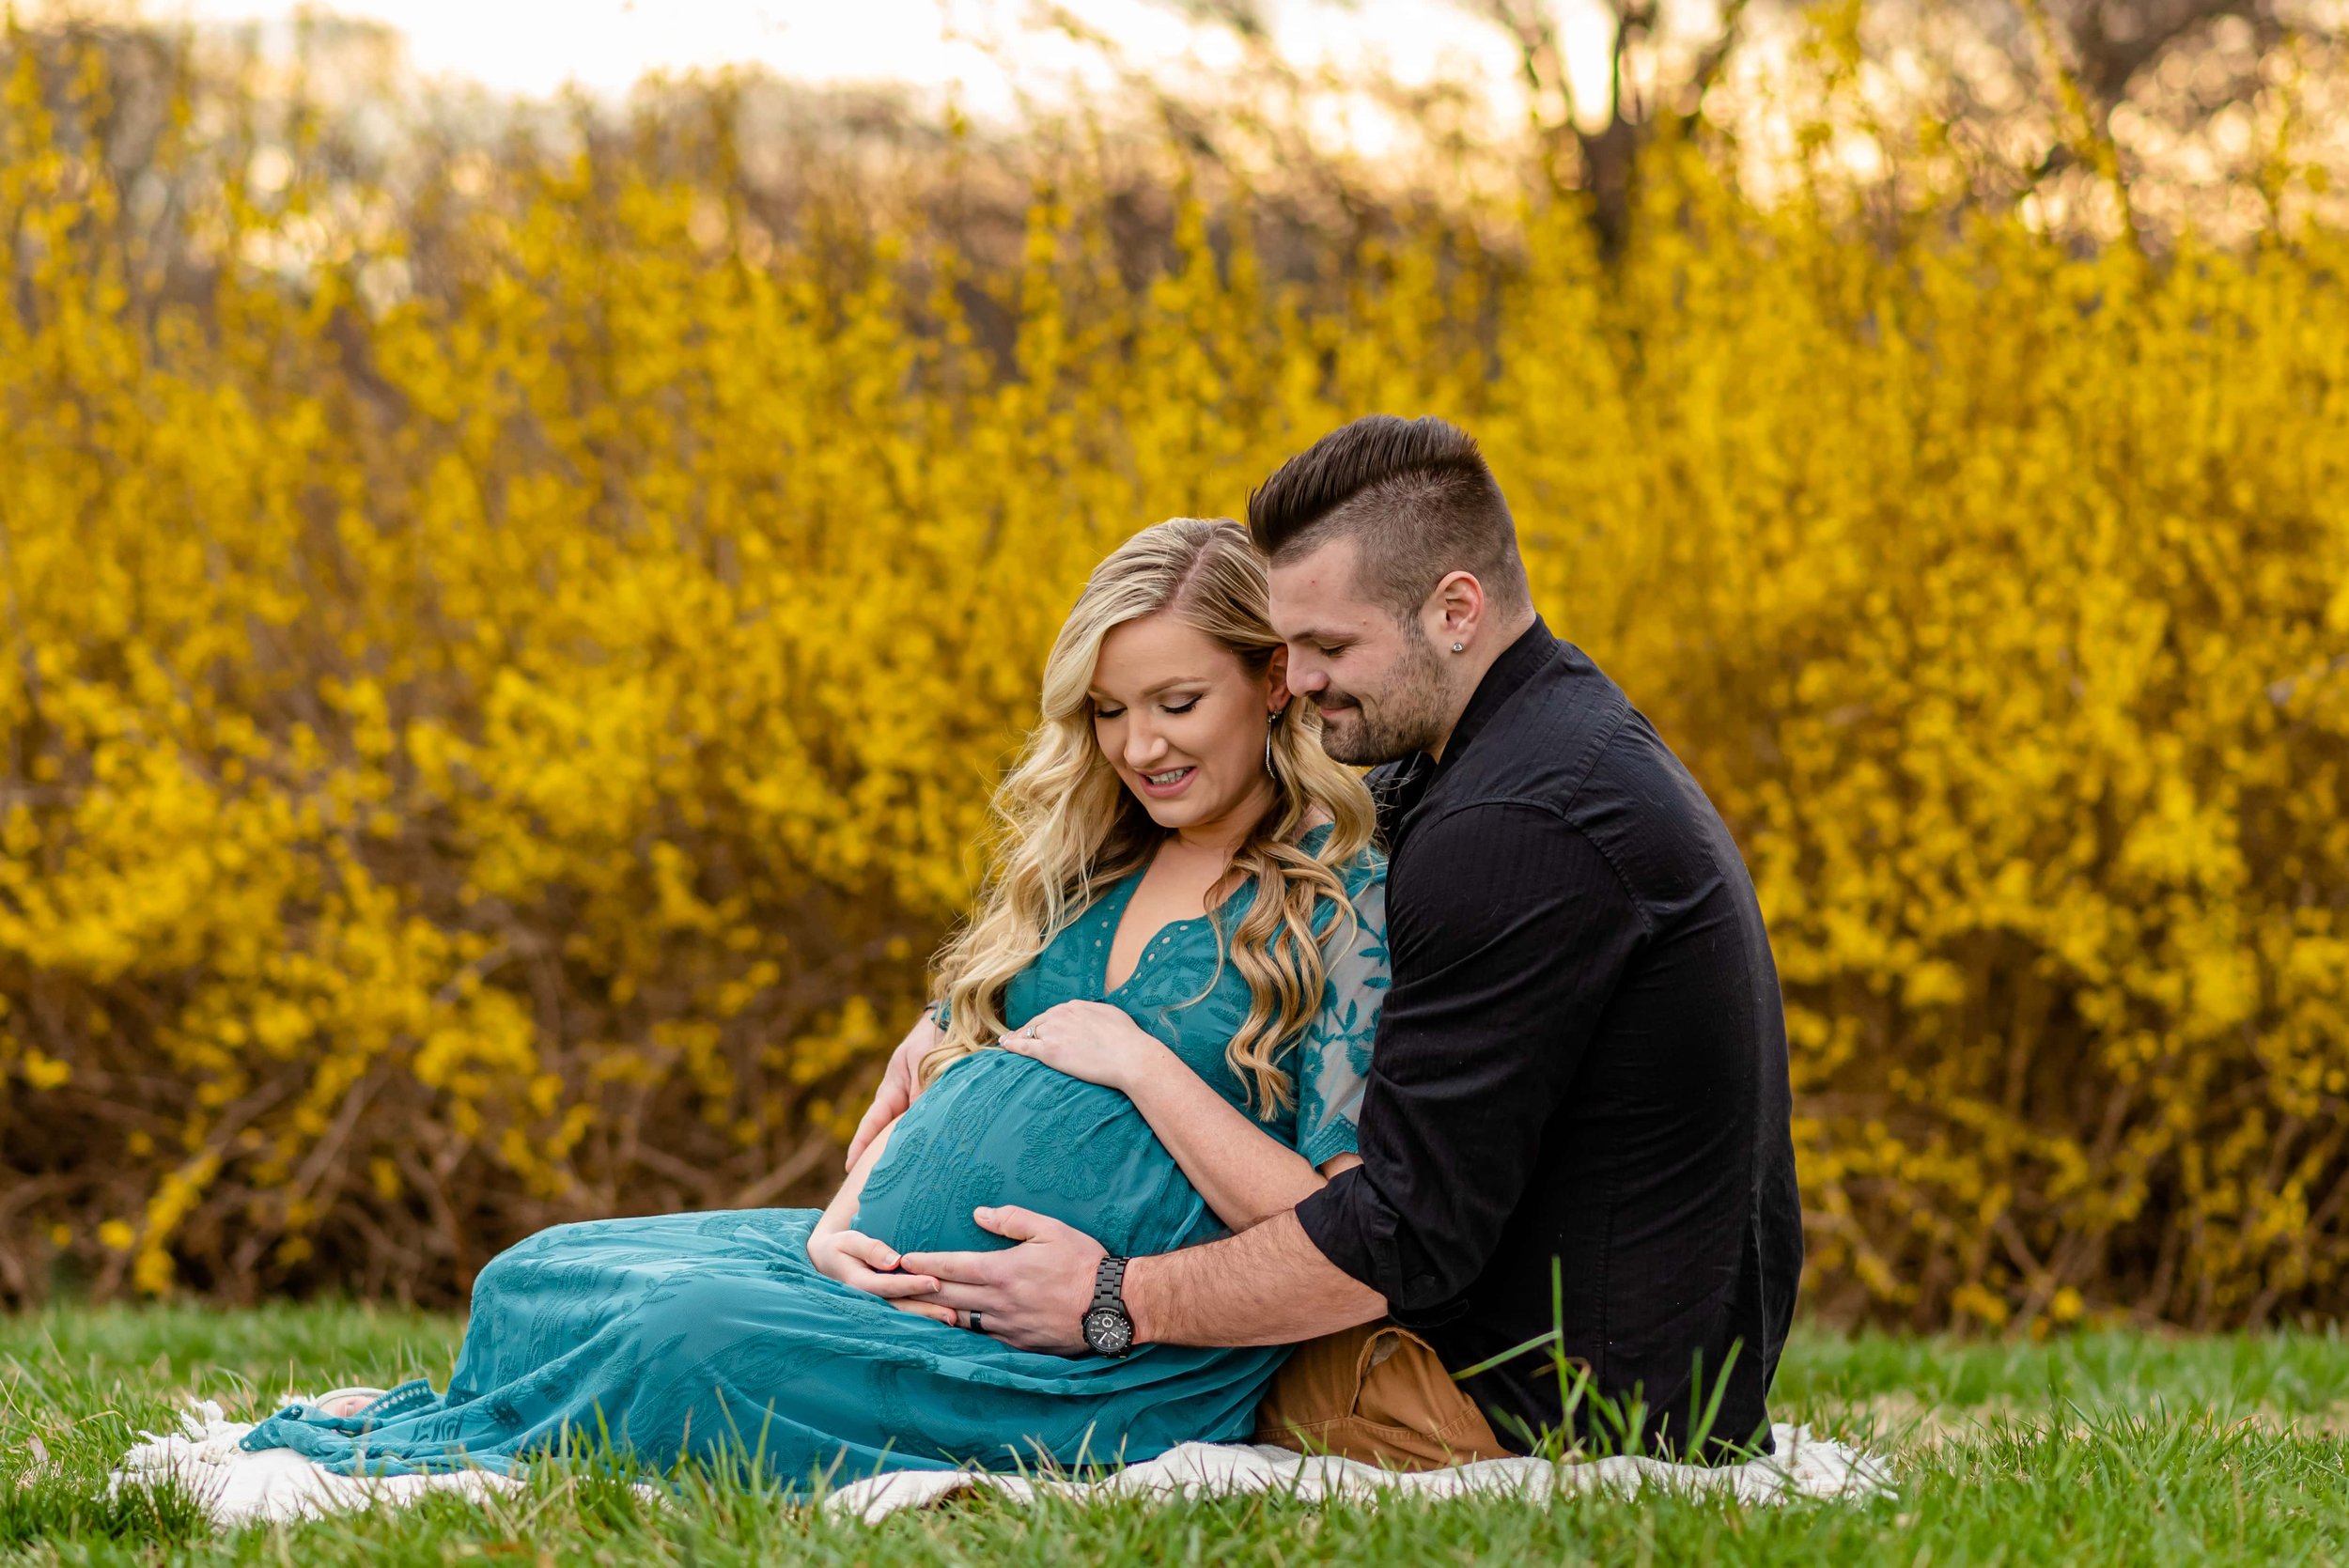 Maryland Maternity Photoshoot with expecting couple sitting on a blanket looking down at belly